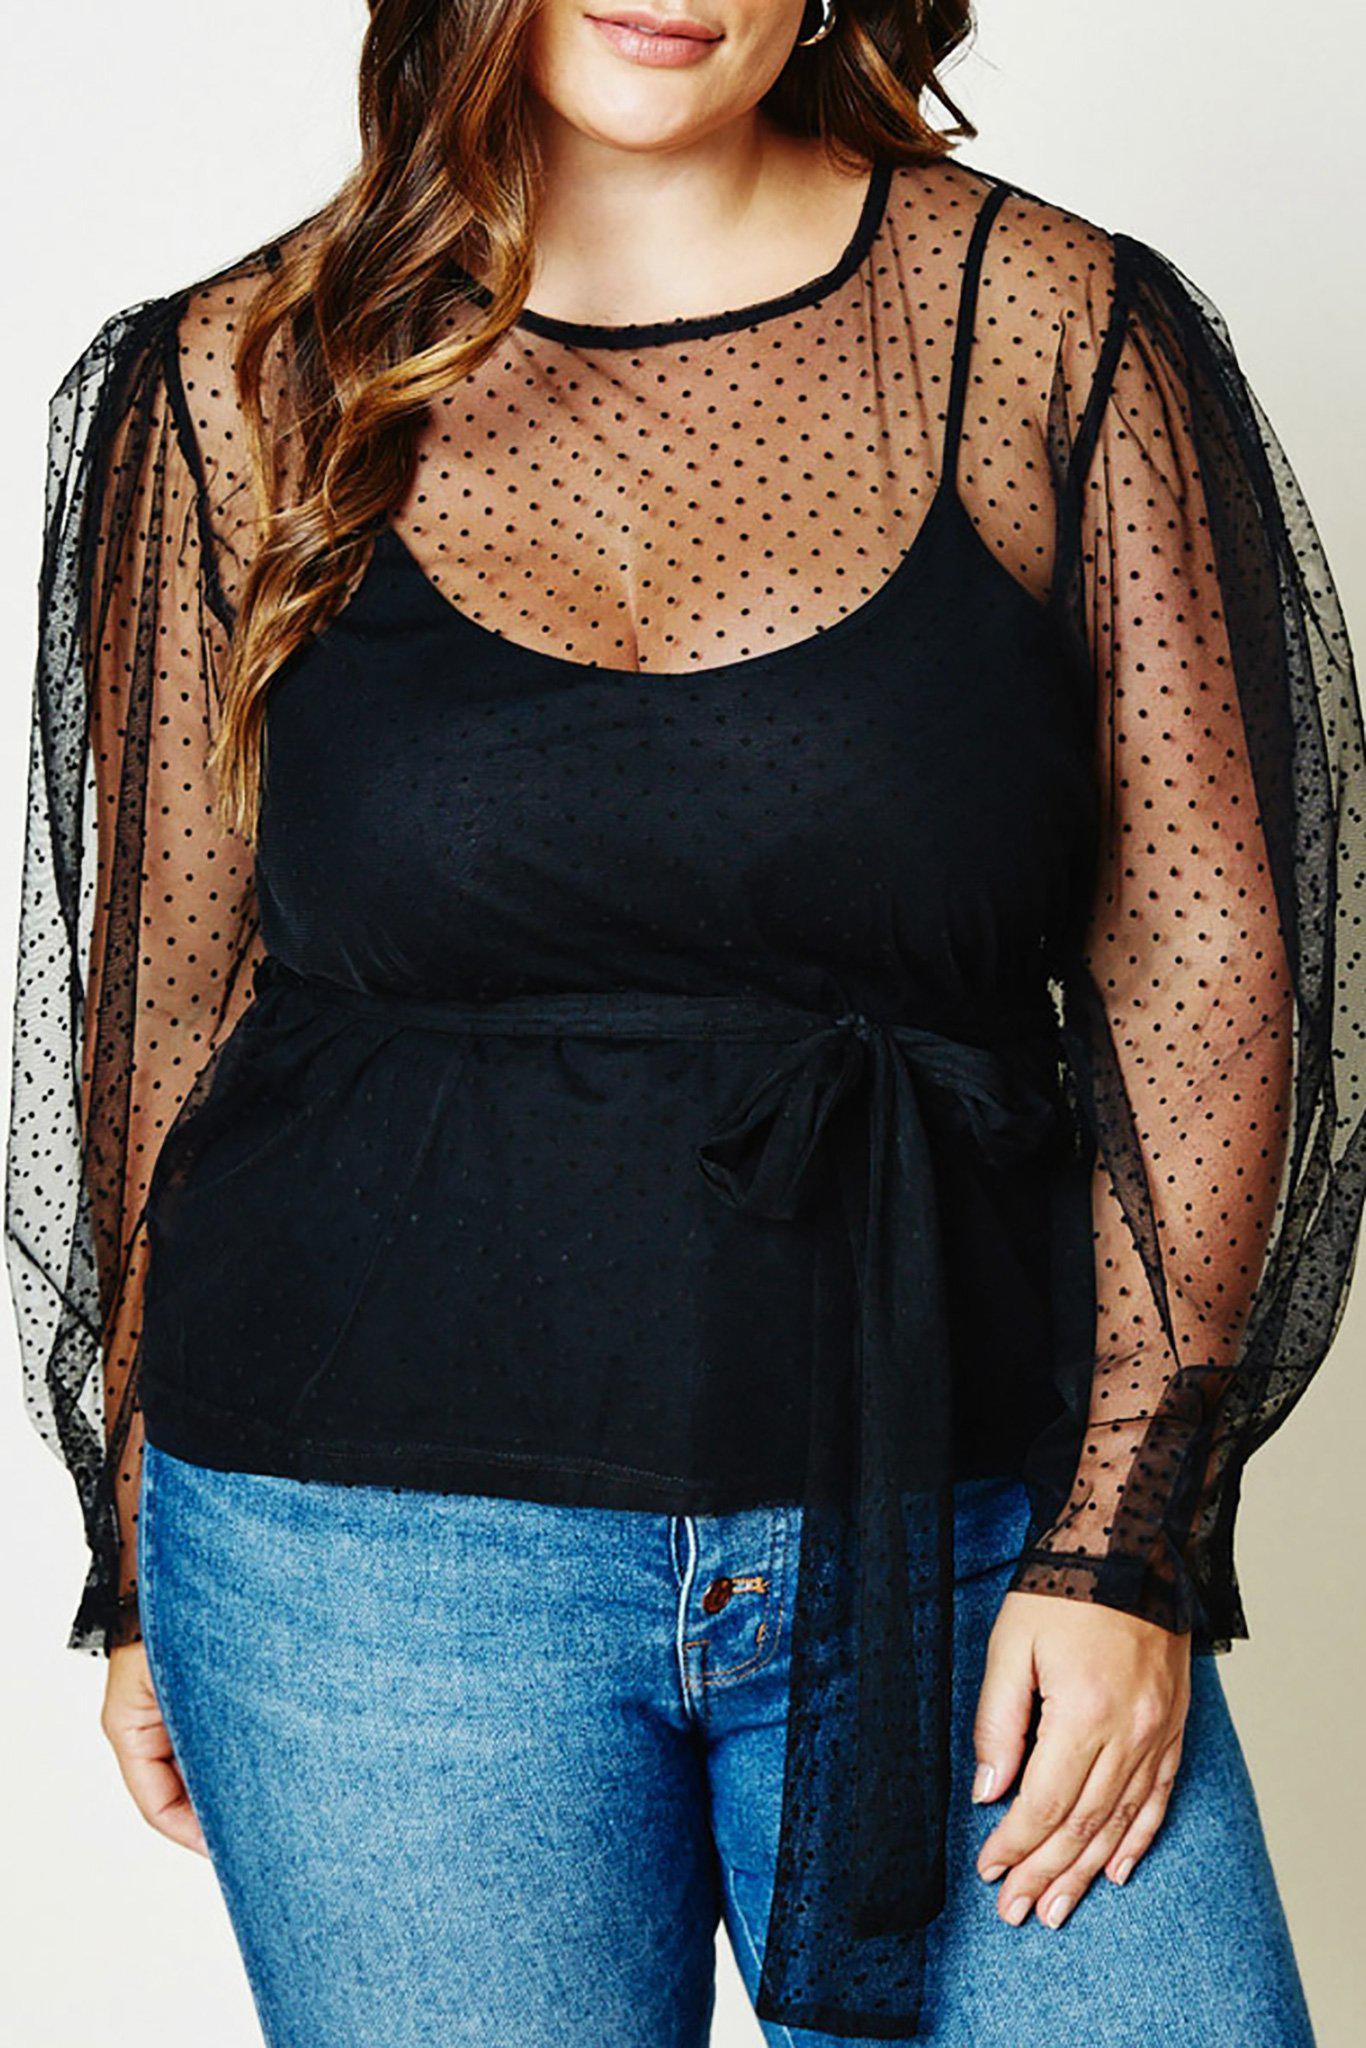 Raven puff sleeve black blouse front view on model